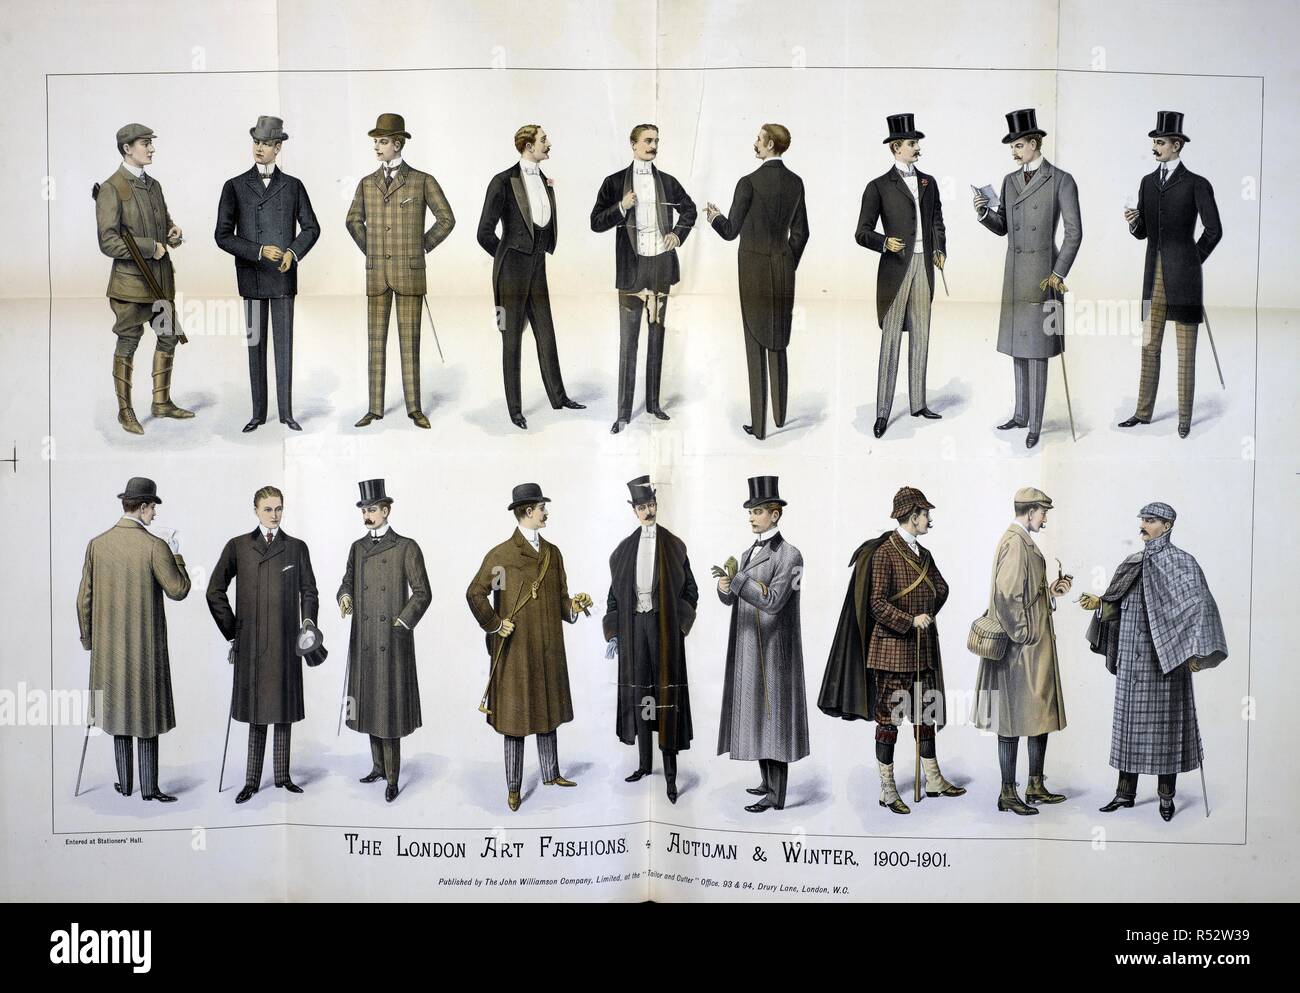 The London art fashions. A gallery showing men's outfits. . London Art  Fashion Journal. London, 1900-01. Source: London Art Fashion Journal.  Autumn and Winter, 1900-01 Stock Photo - Alamy